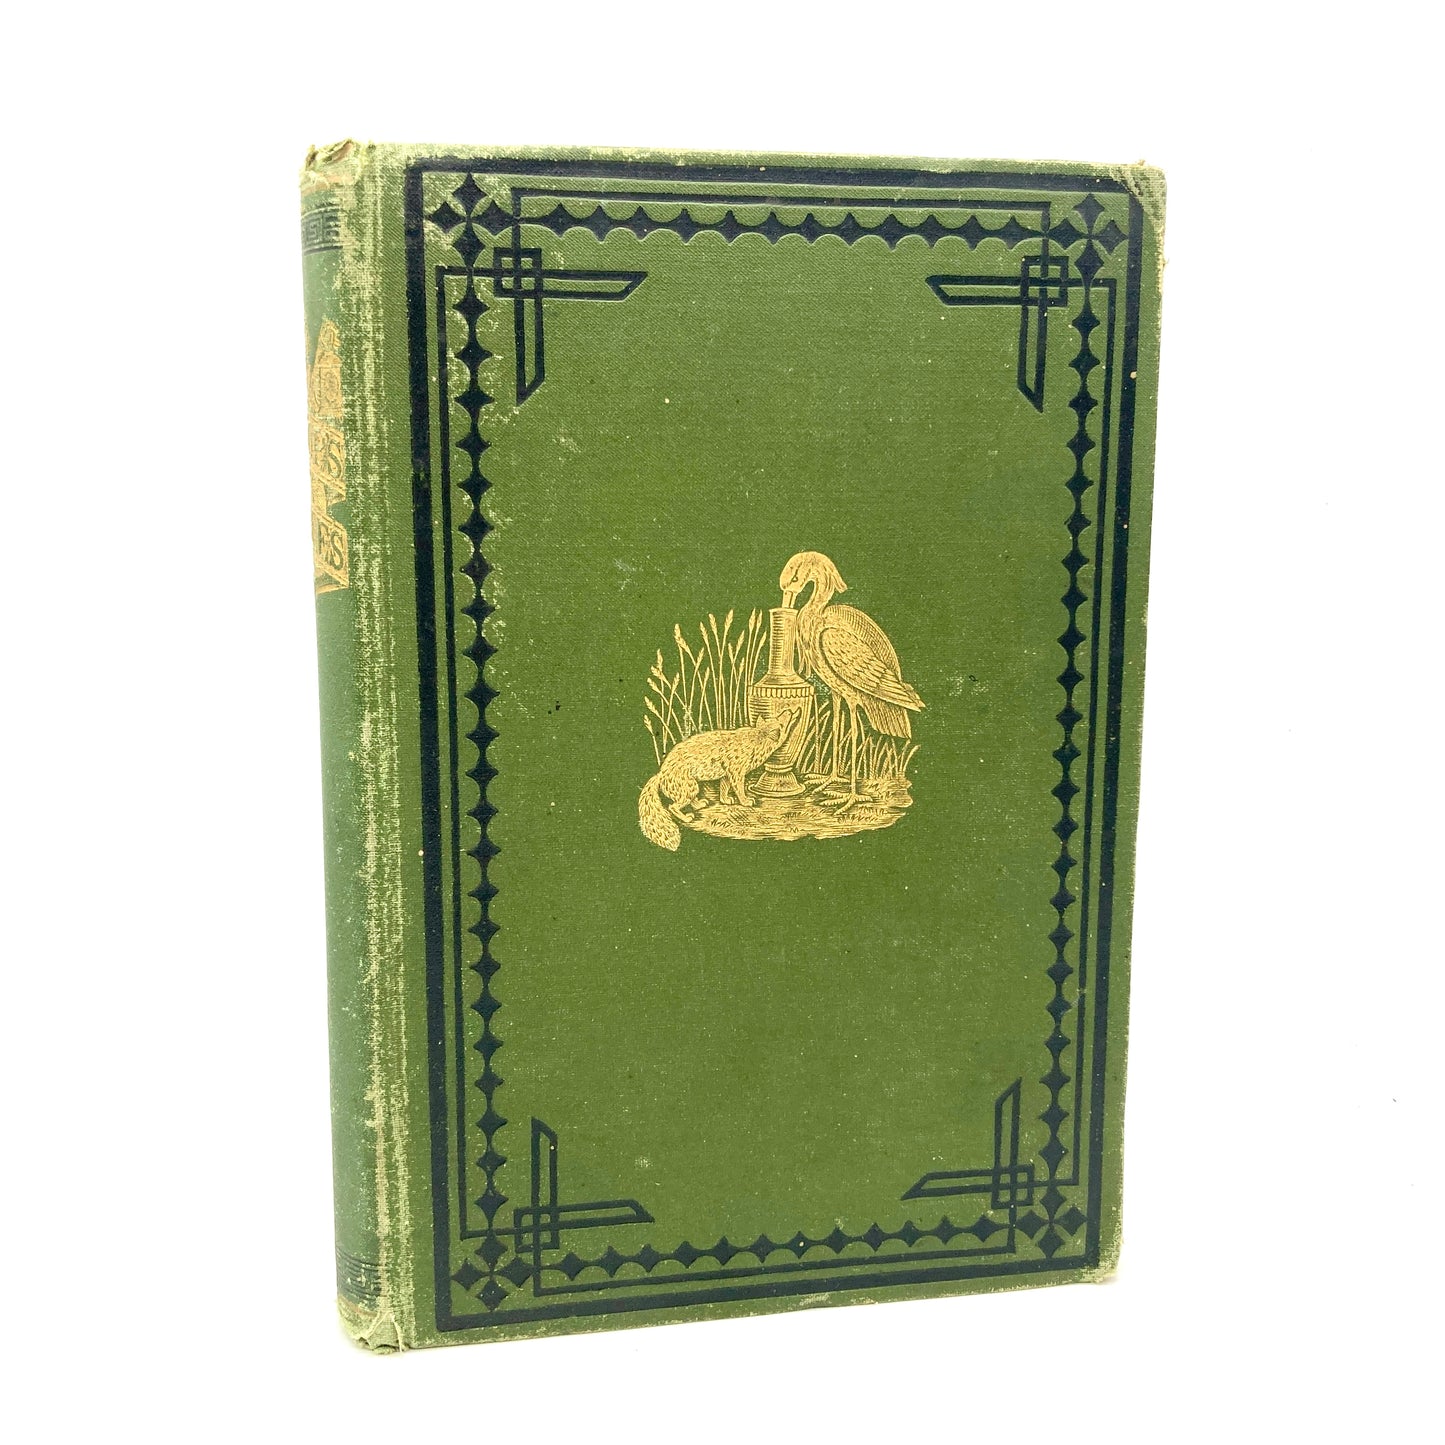 JAMES, Thomas "Aesop's Fables" [Collins & Brother, c1848] - Buzz Bookstore